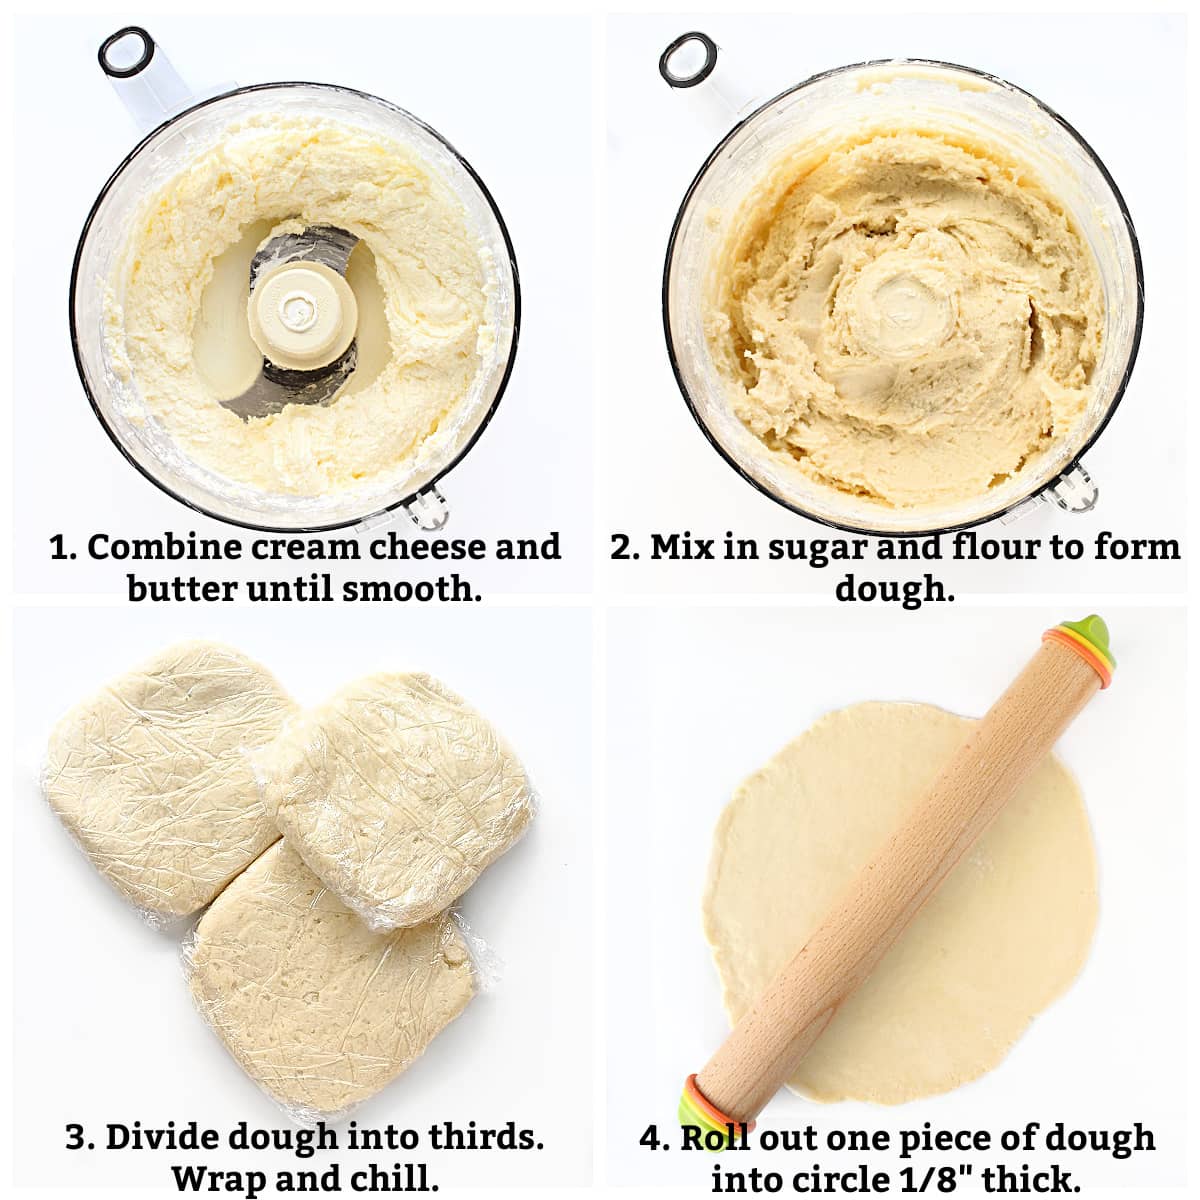 Instructions: in food processor combine ingredients into dough, divide dough and chill, roll out into circle.